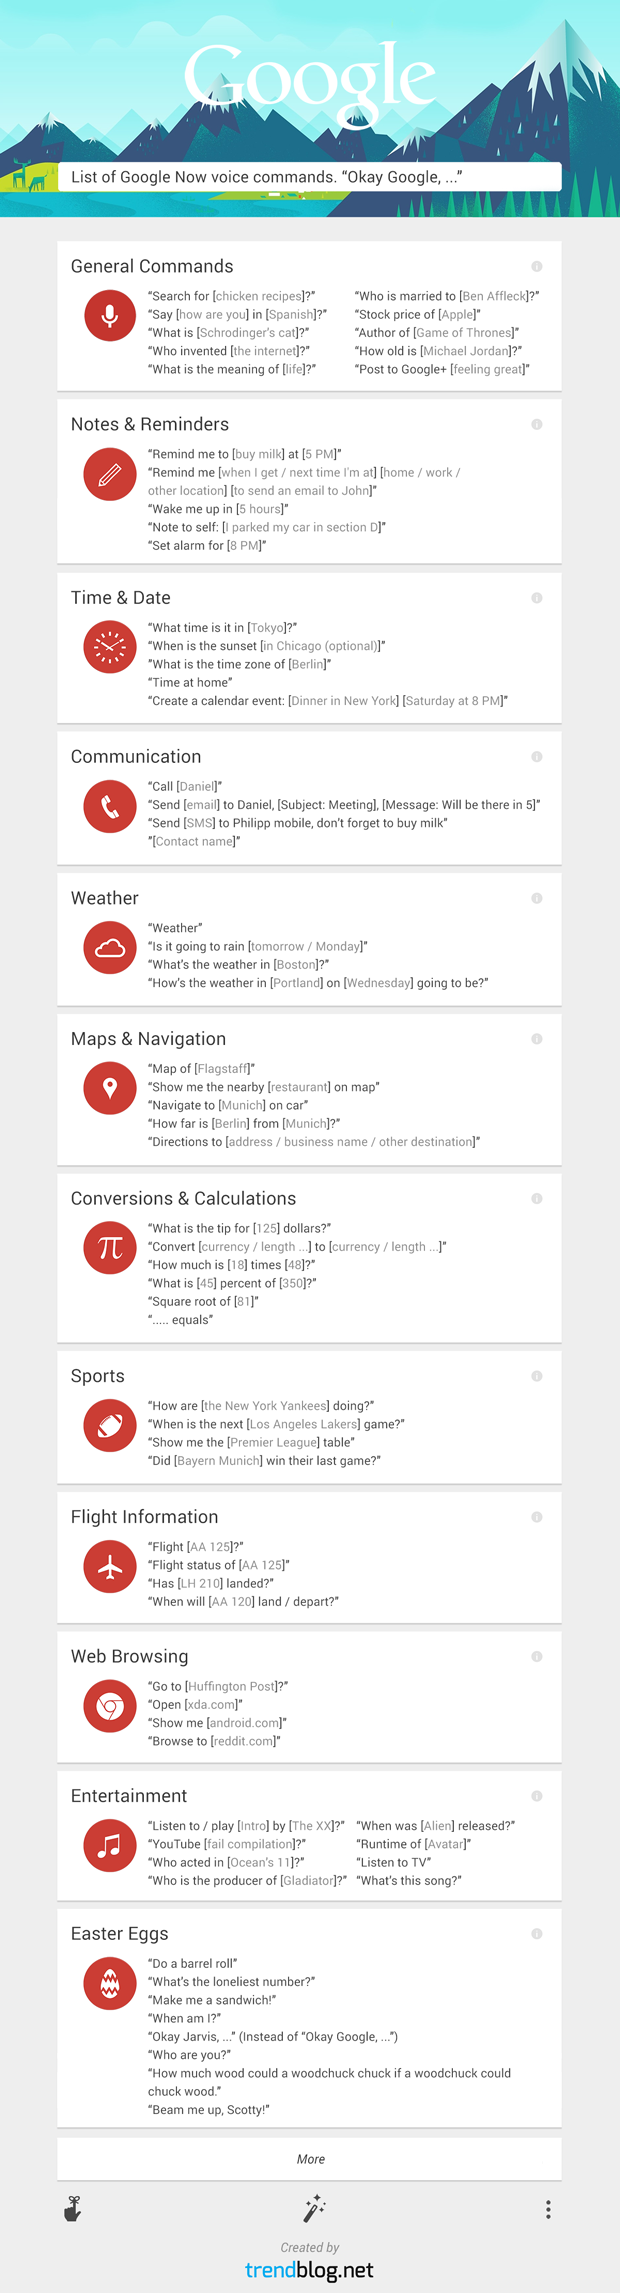 Learn Over 60 Google Now Commands With This Infographic